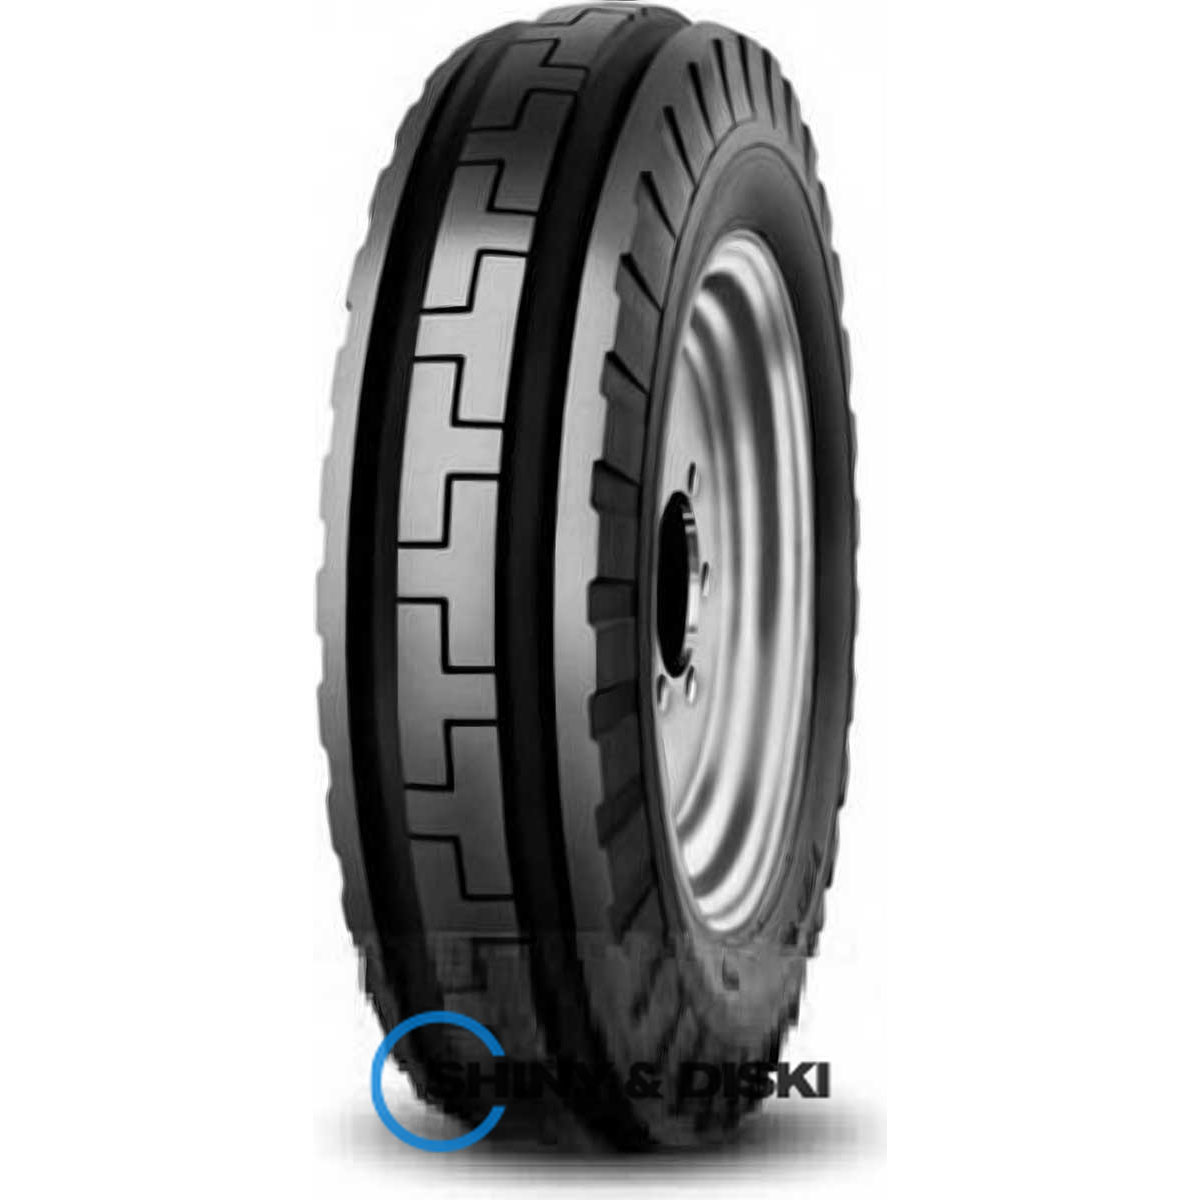 cultor as front 08 6.50 r16 97a6/89a8